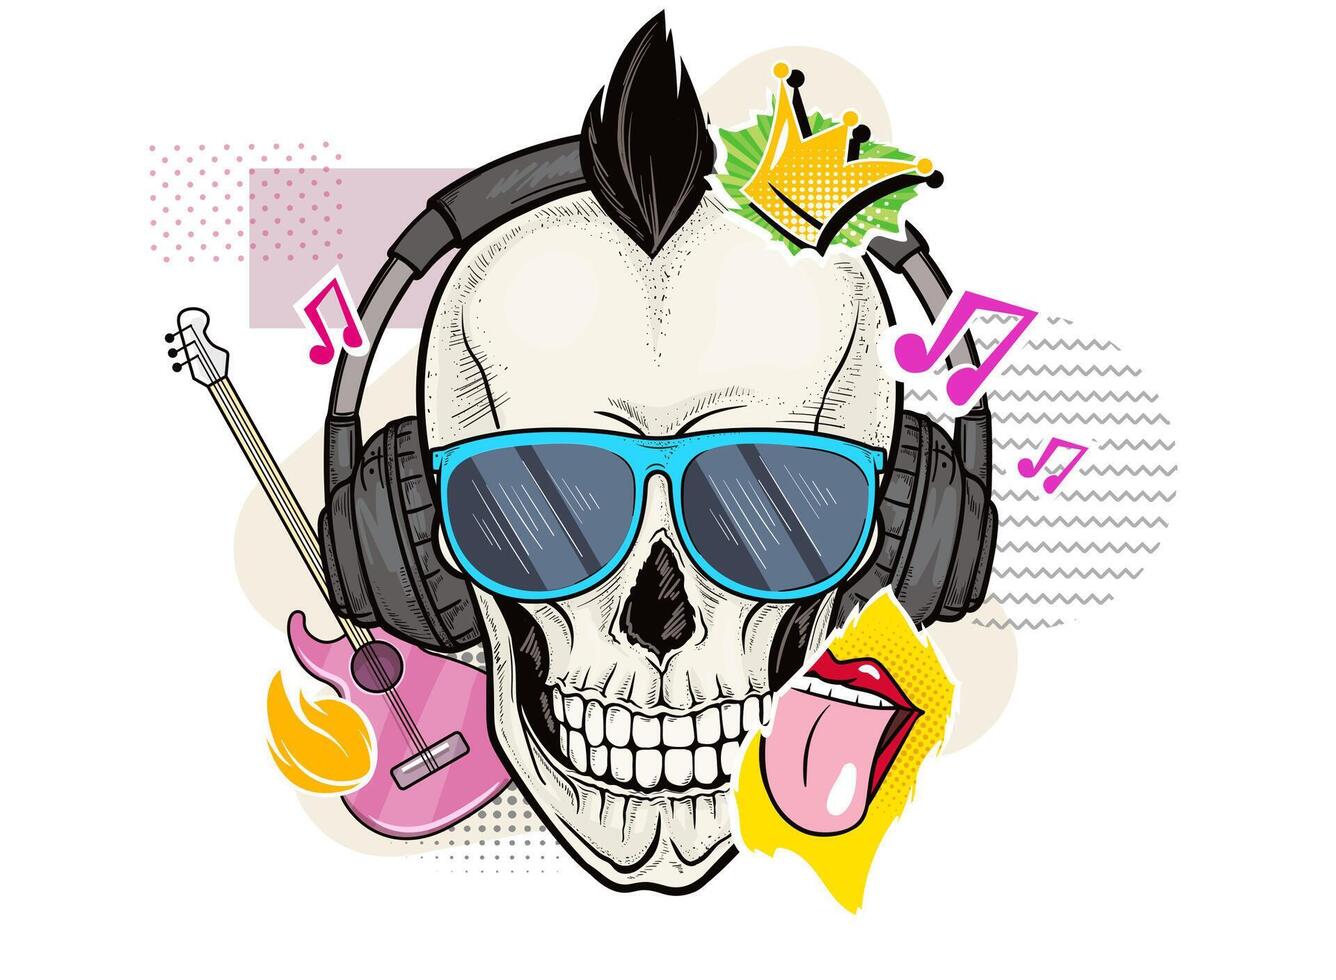 Human gothic skull with sunglasses, headphones and rock music symbol stickers. Pop art hipster skeleton head with guitar, tongue and crown collage elements on white background. vector